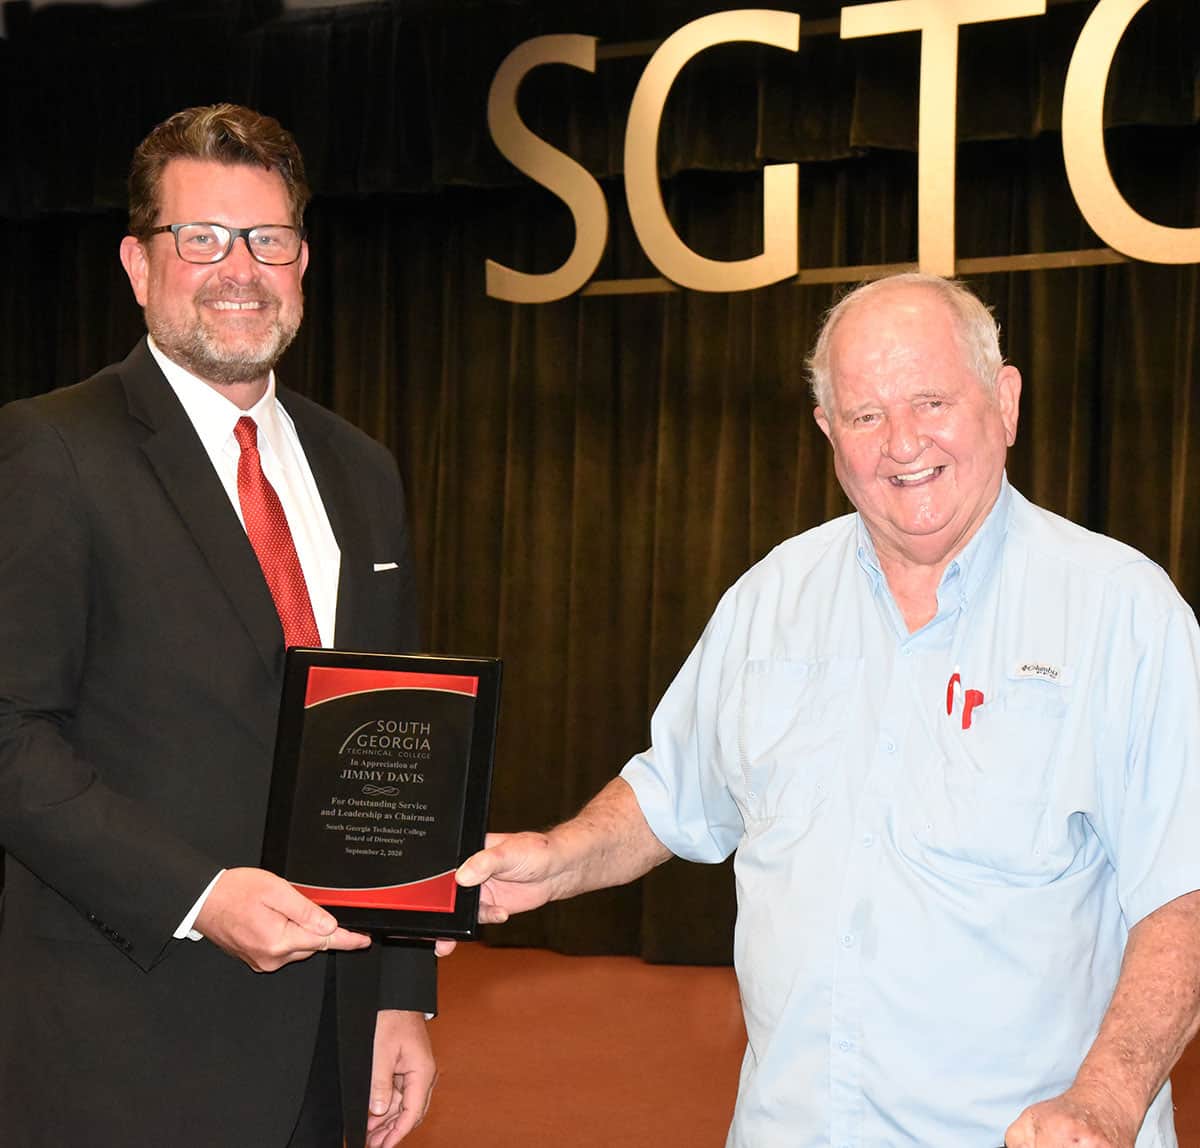 SGTC President Dr. John Watford (left) is shown above presenting the plaque to Jimmy Davis (right) in recognition of his service to the SGTC Board of Directors as Chairman for 2019 – 2020.